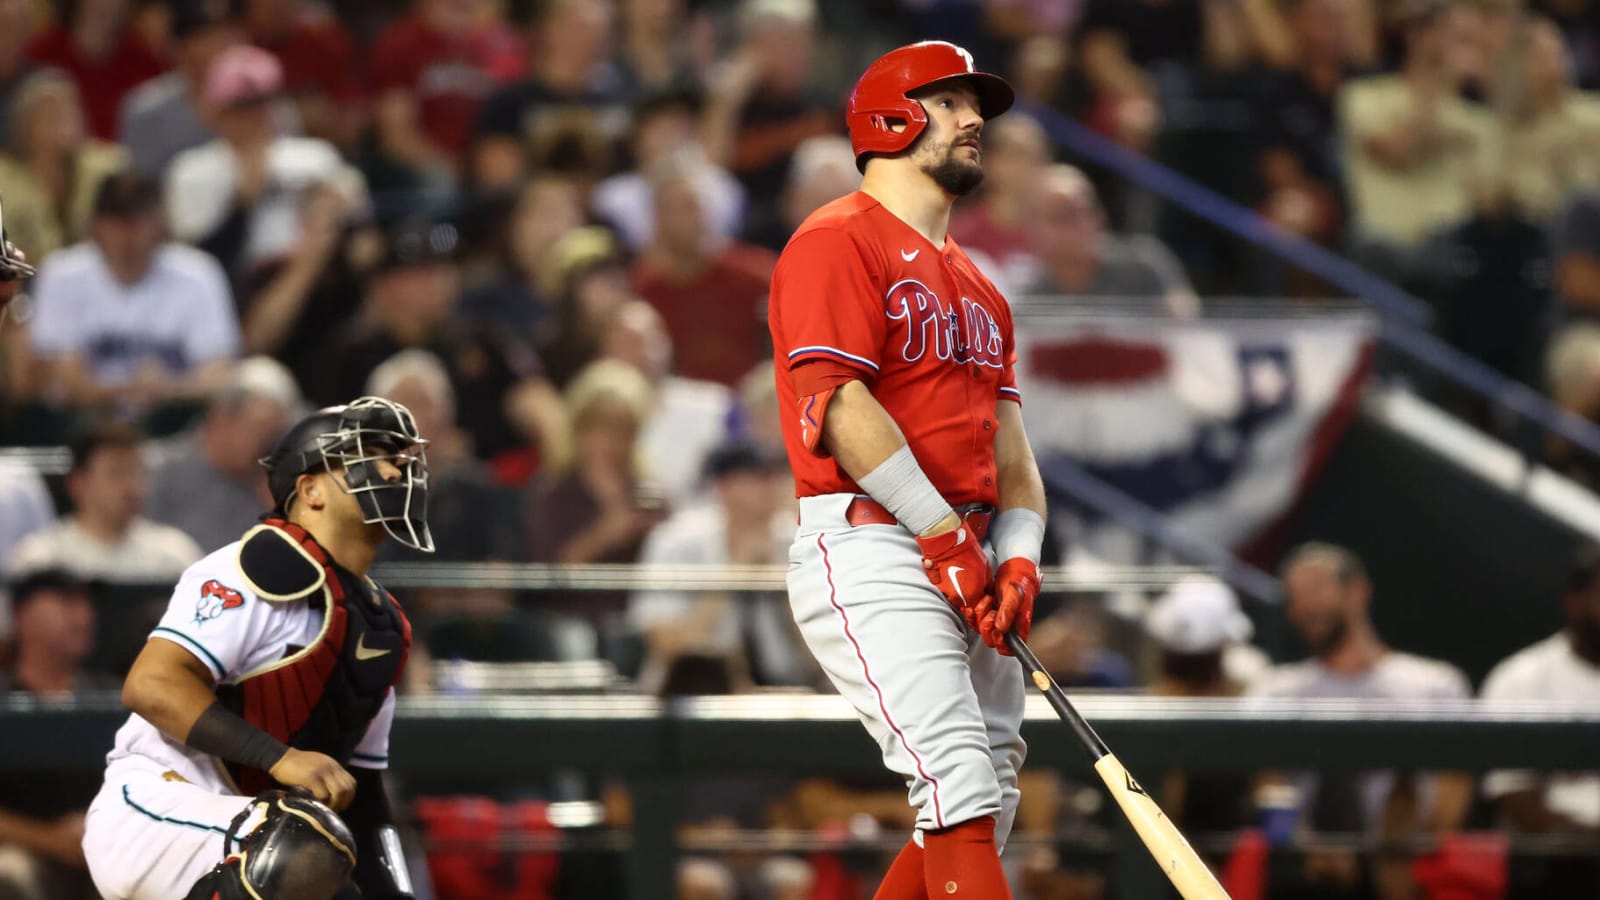 Watch: Phillies slugger Kyle Schwarber crushes 461-foot HR, setting NLCS record 